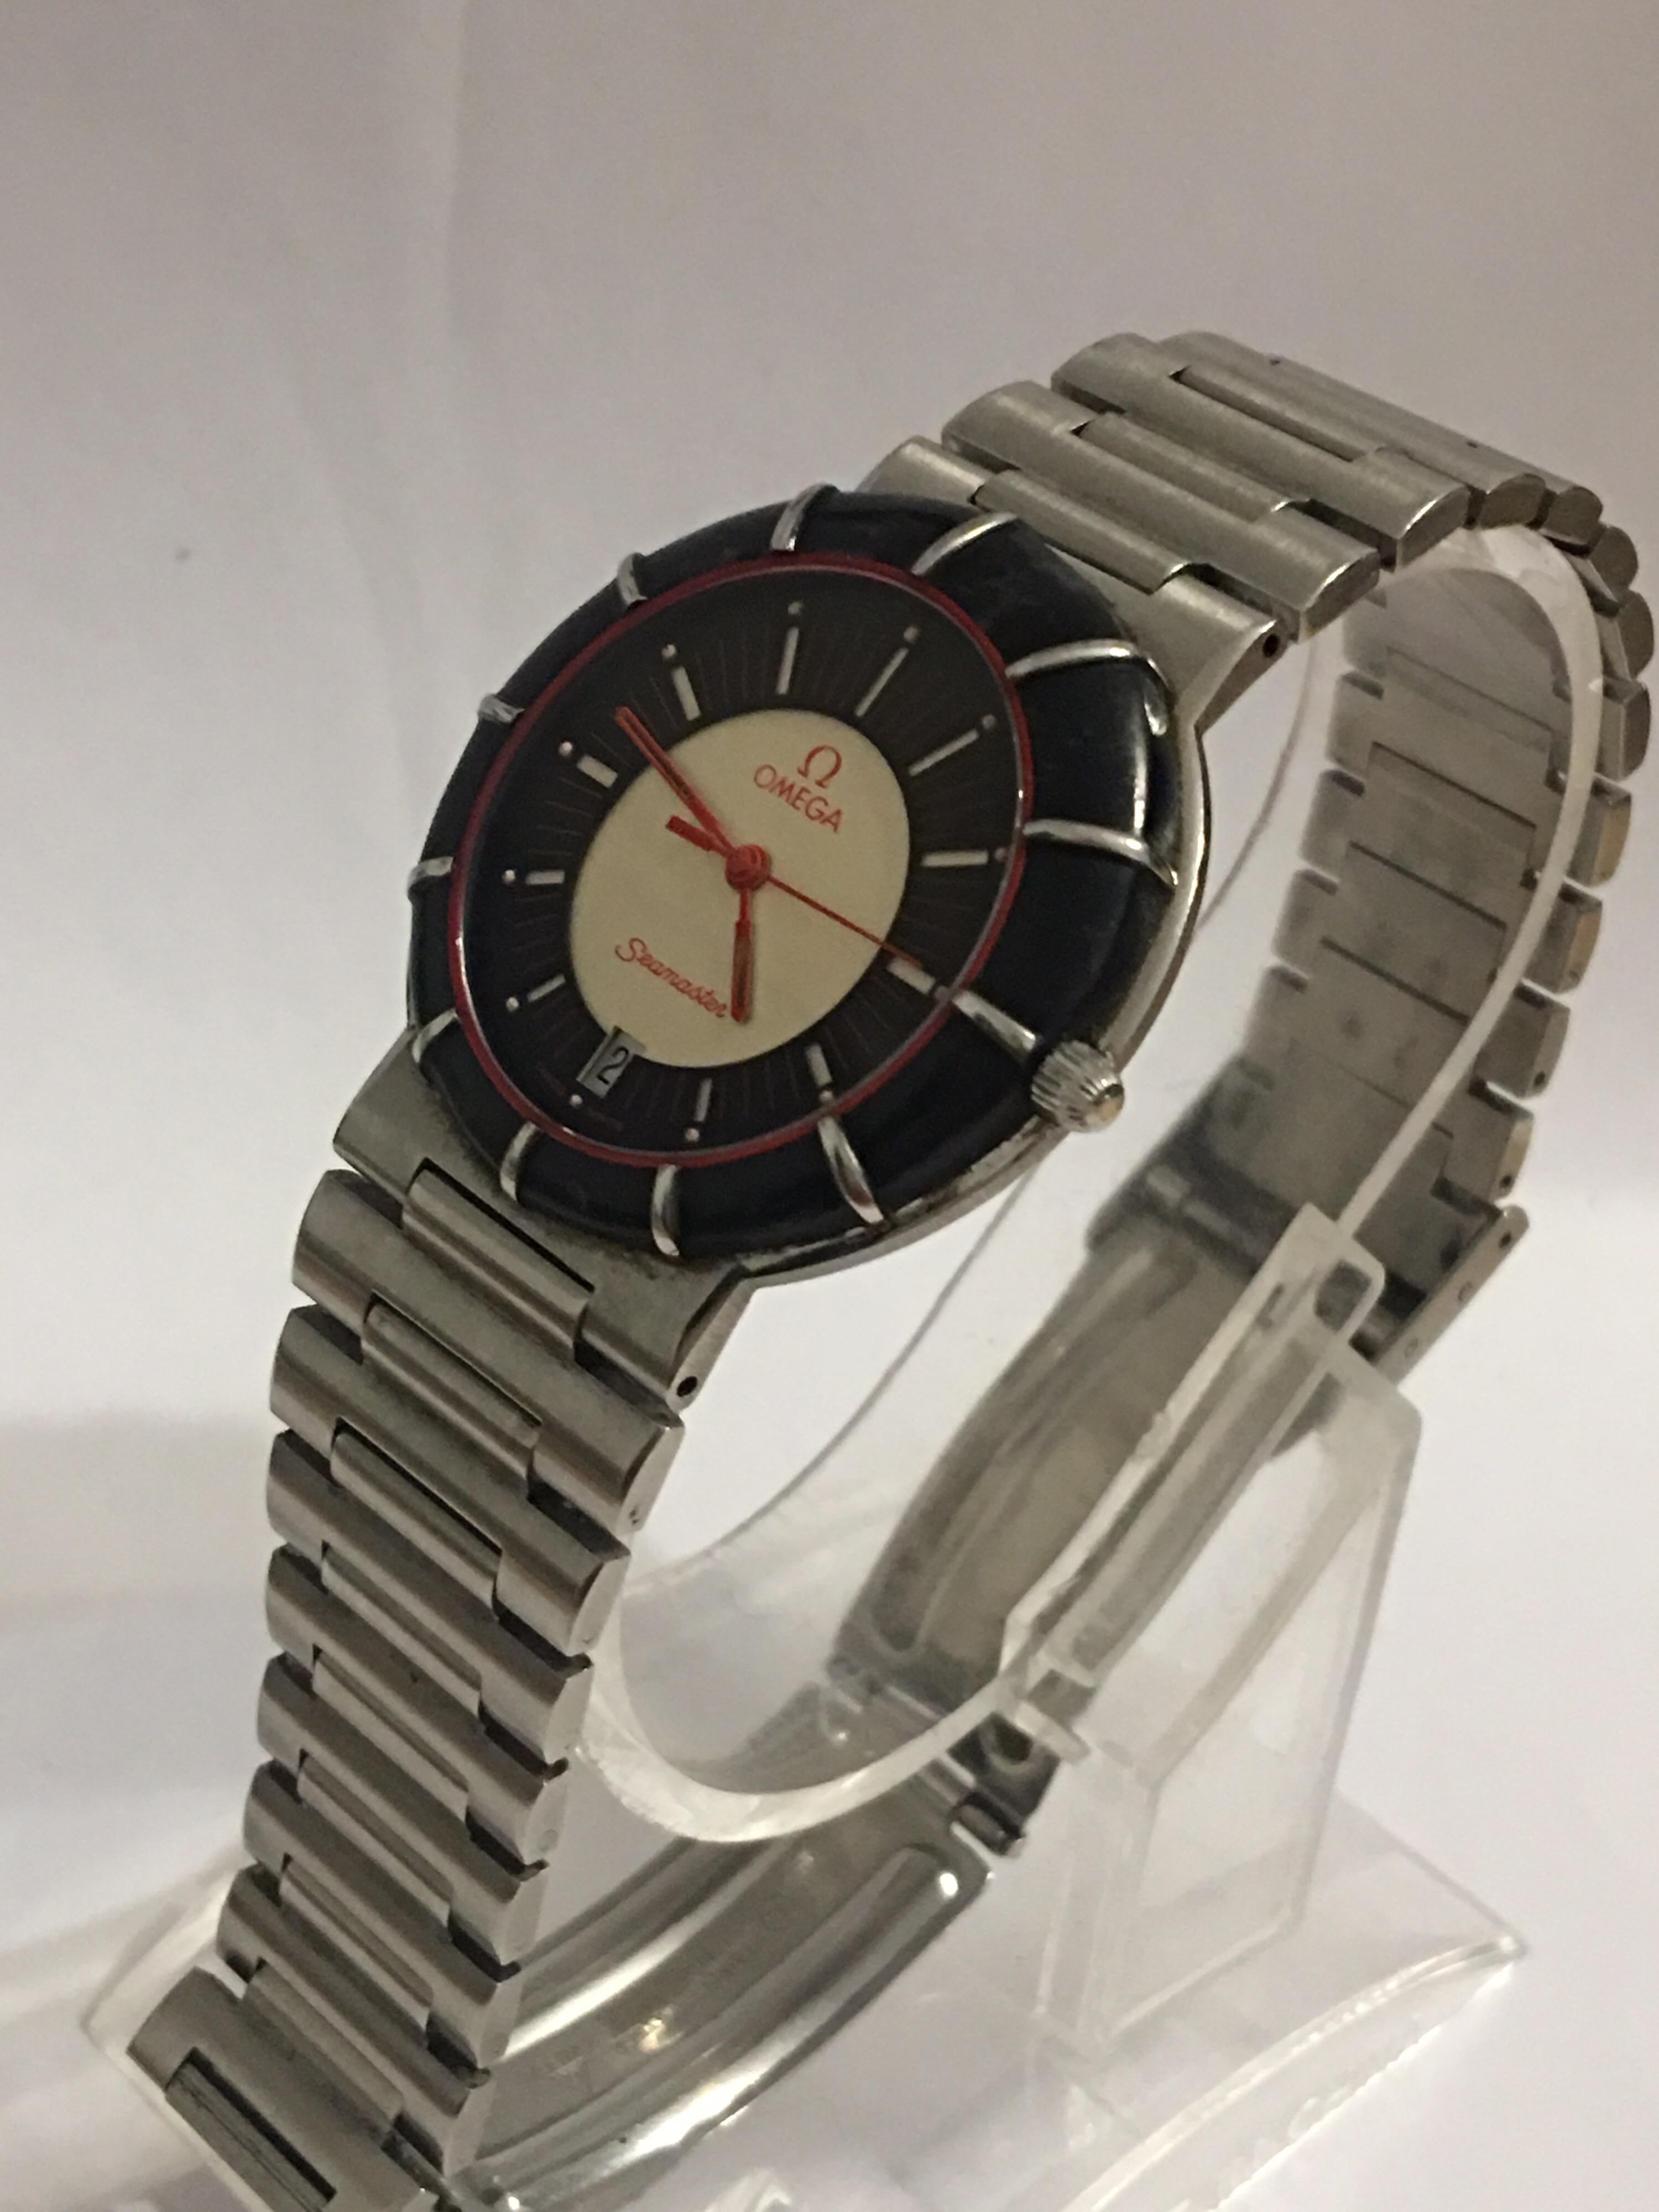 This beautiful pre own battery driven watch is in good working condition and is running well. Please study the images carefully as form part of the description.